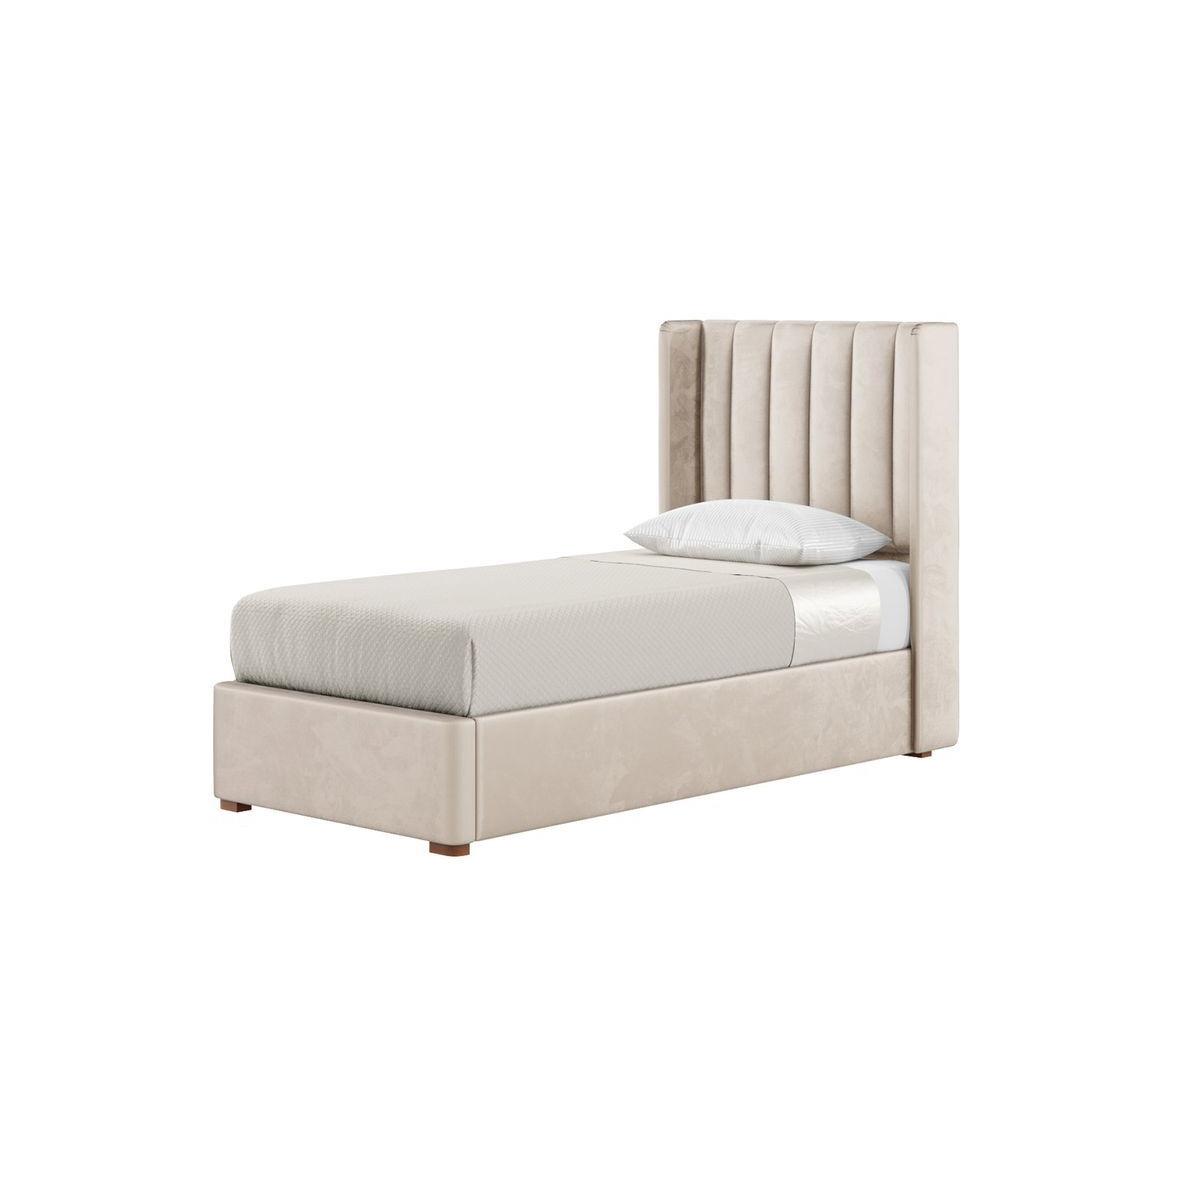 Naomi 3ft Single Bed Frame With Fluted Vertical Stitch Wing Headboard, light beige, Leg colour: aveo - image 1